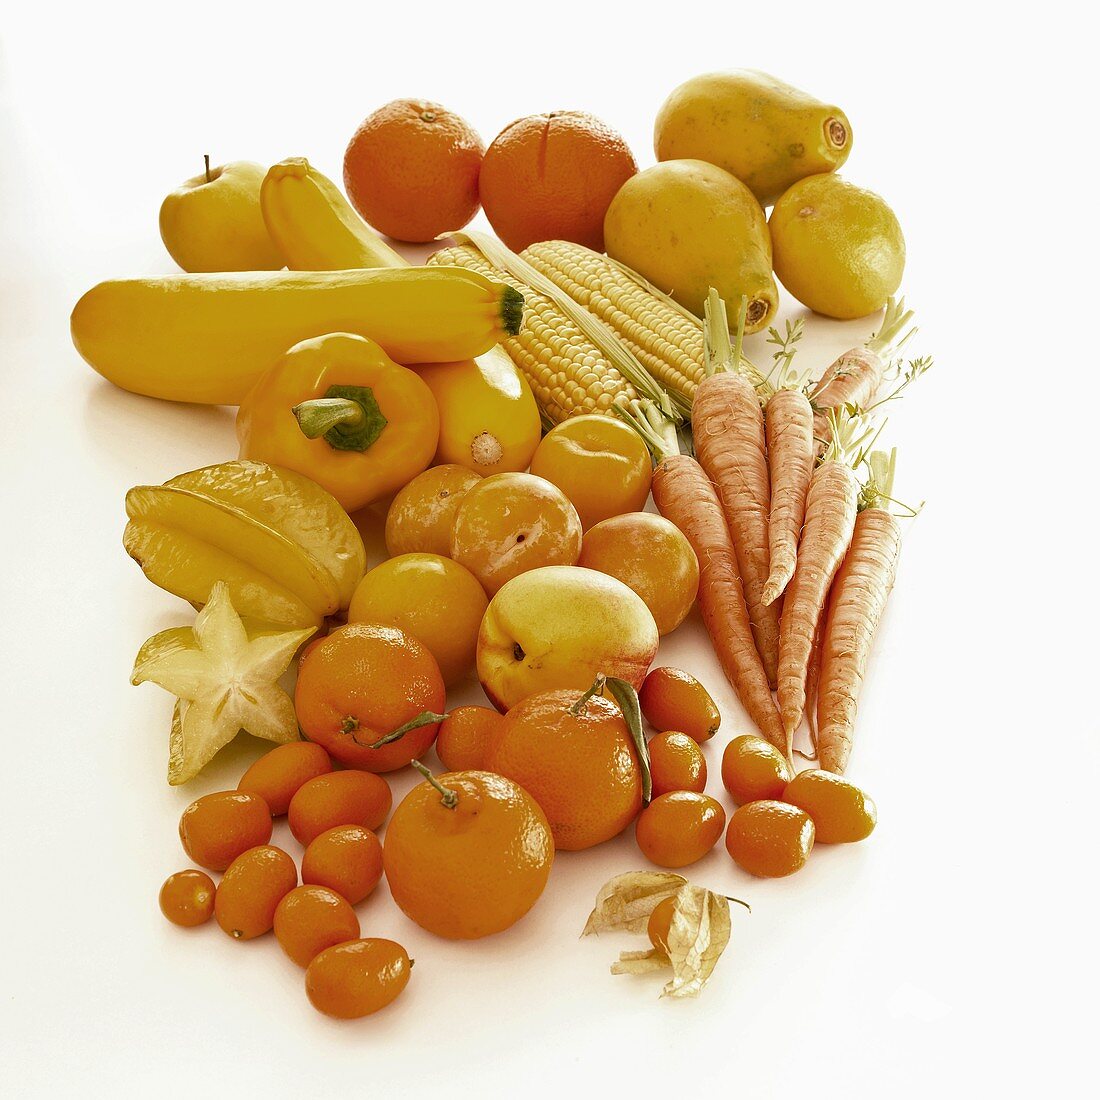 Five-a-day: yellow and orange fruit and vegetables